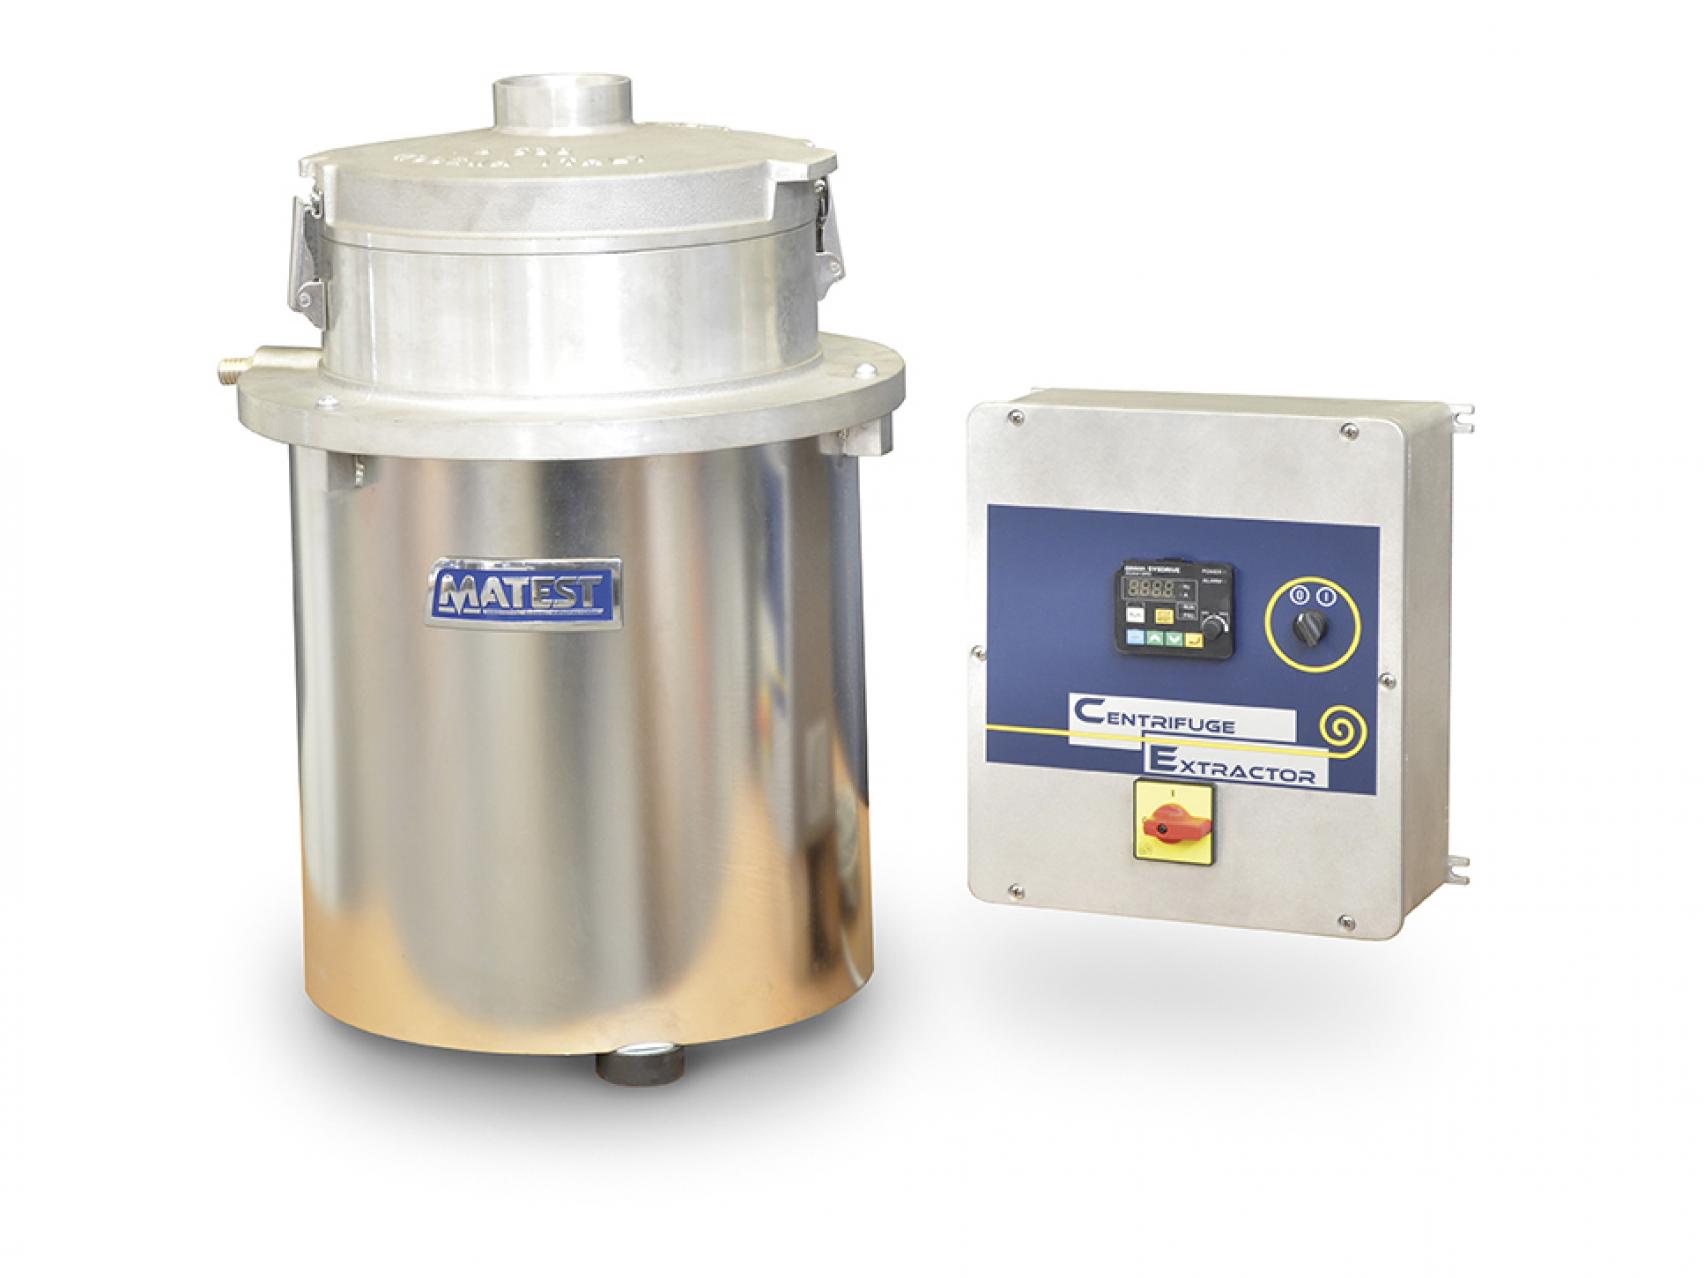 Centrifuge extractor explosion proof, 1500g